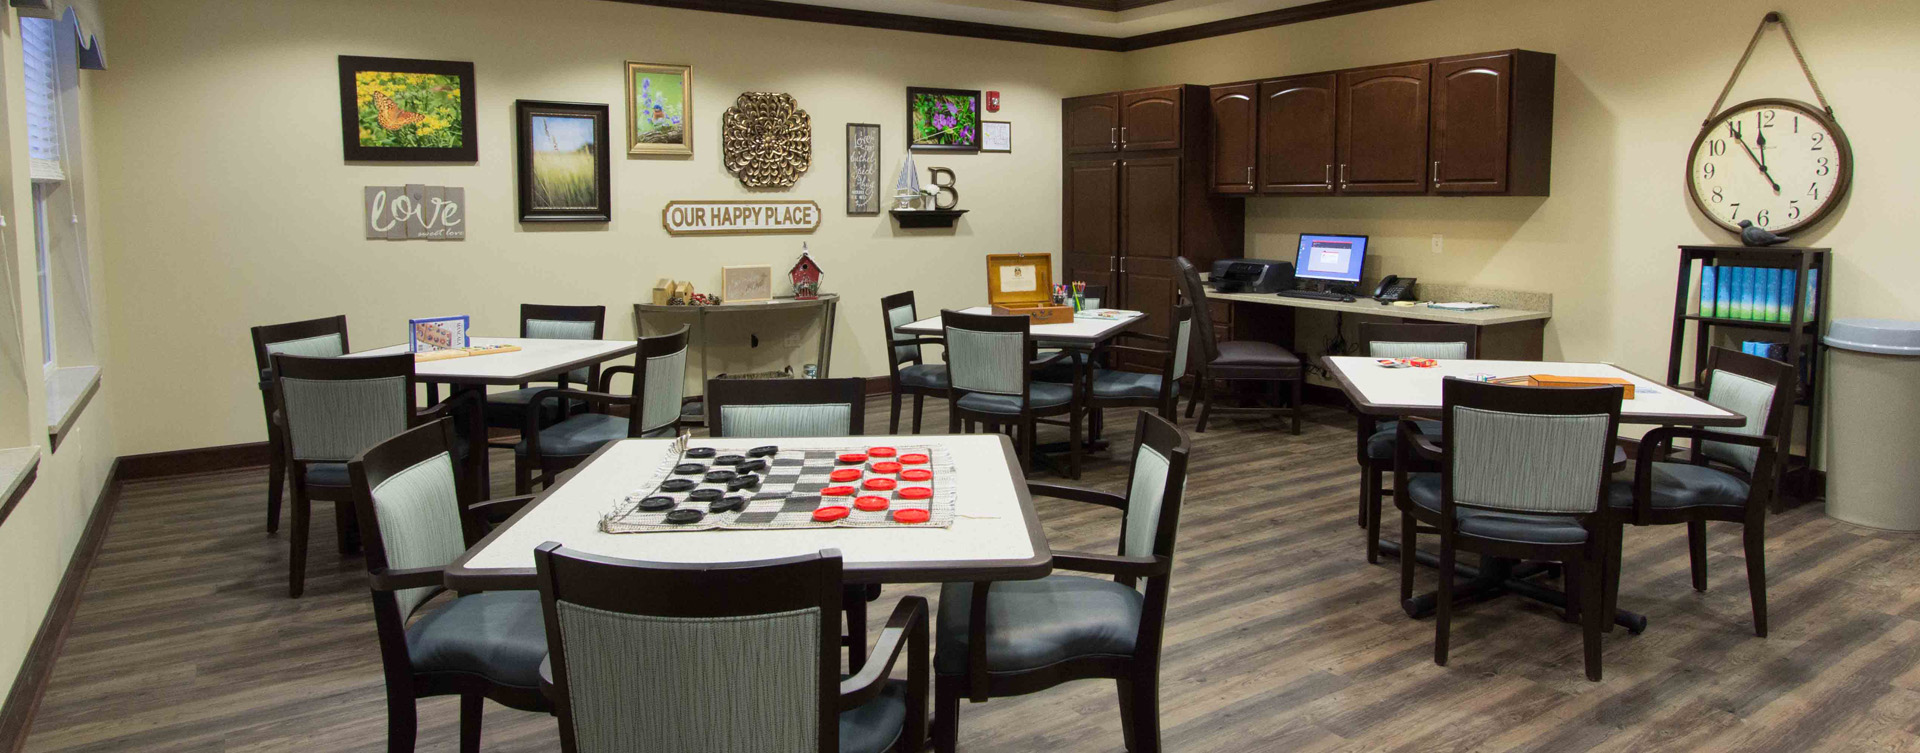 Enjoy a good card game with friends in the activity room at Bickford of Gurnee